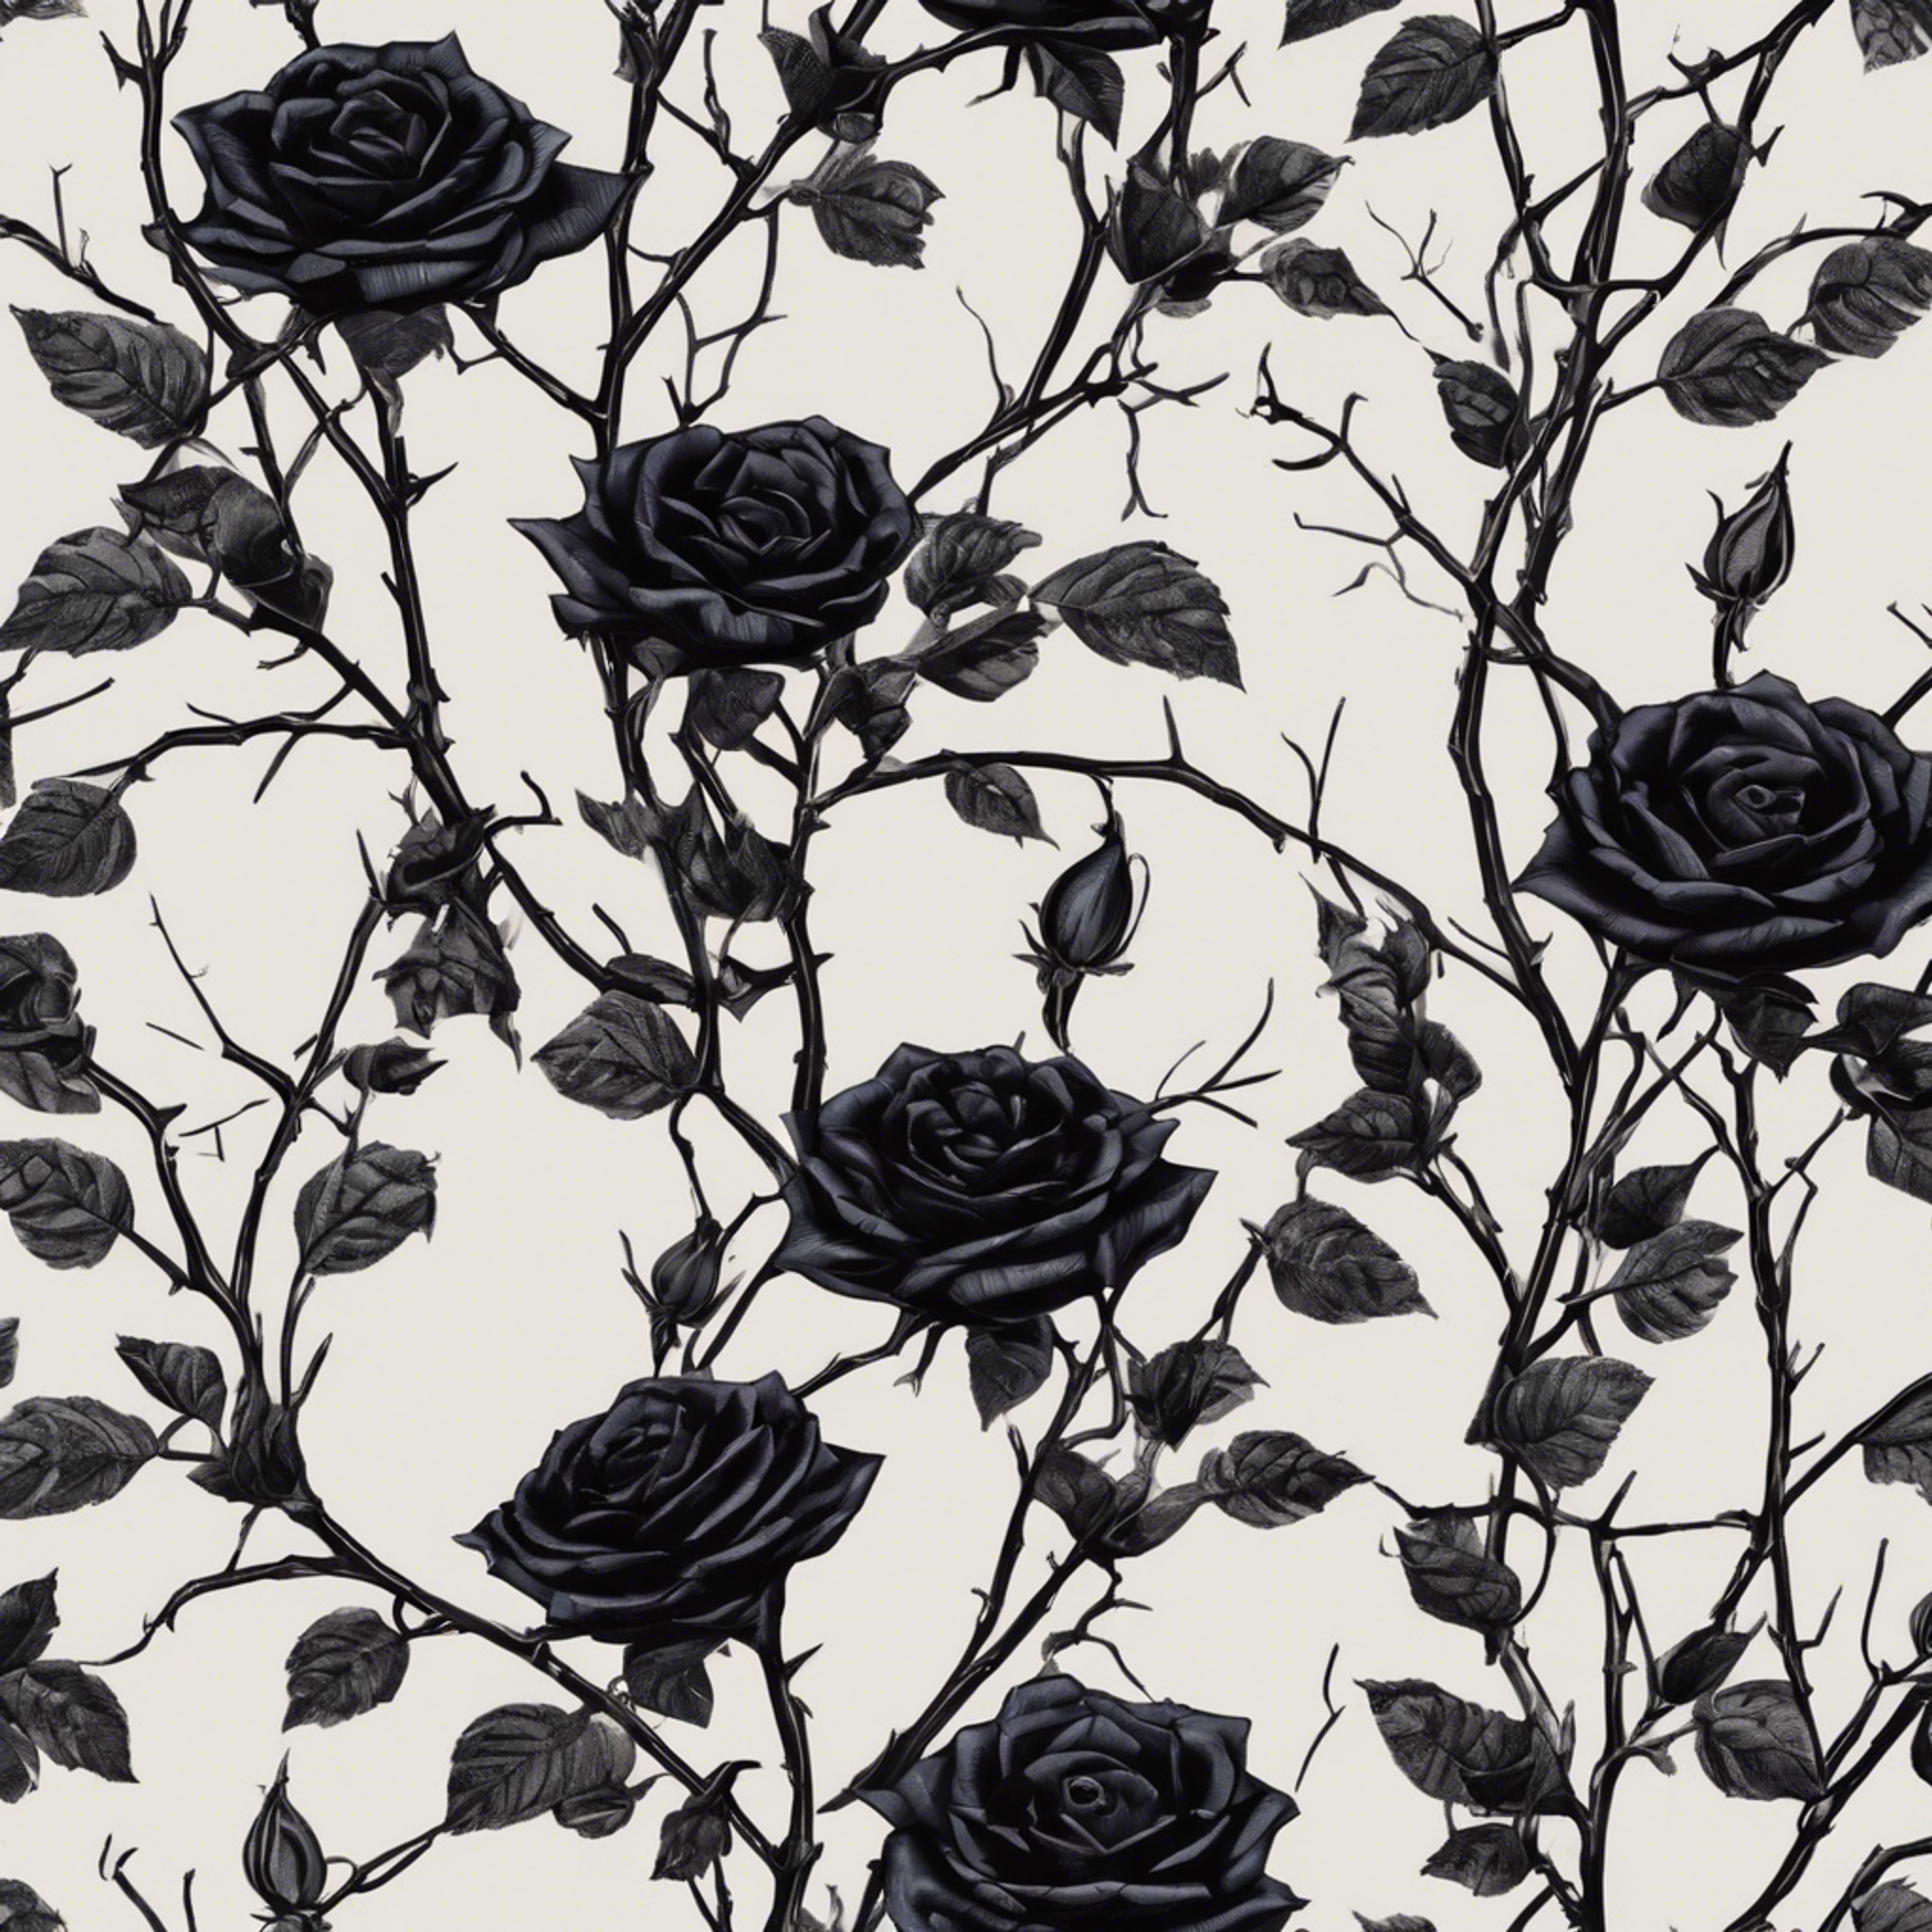 A Gothic floral wallpaper with black roses surrounded by thorny vines.壁紙[5e063bccd36941e3a55e]